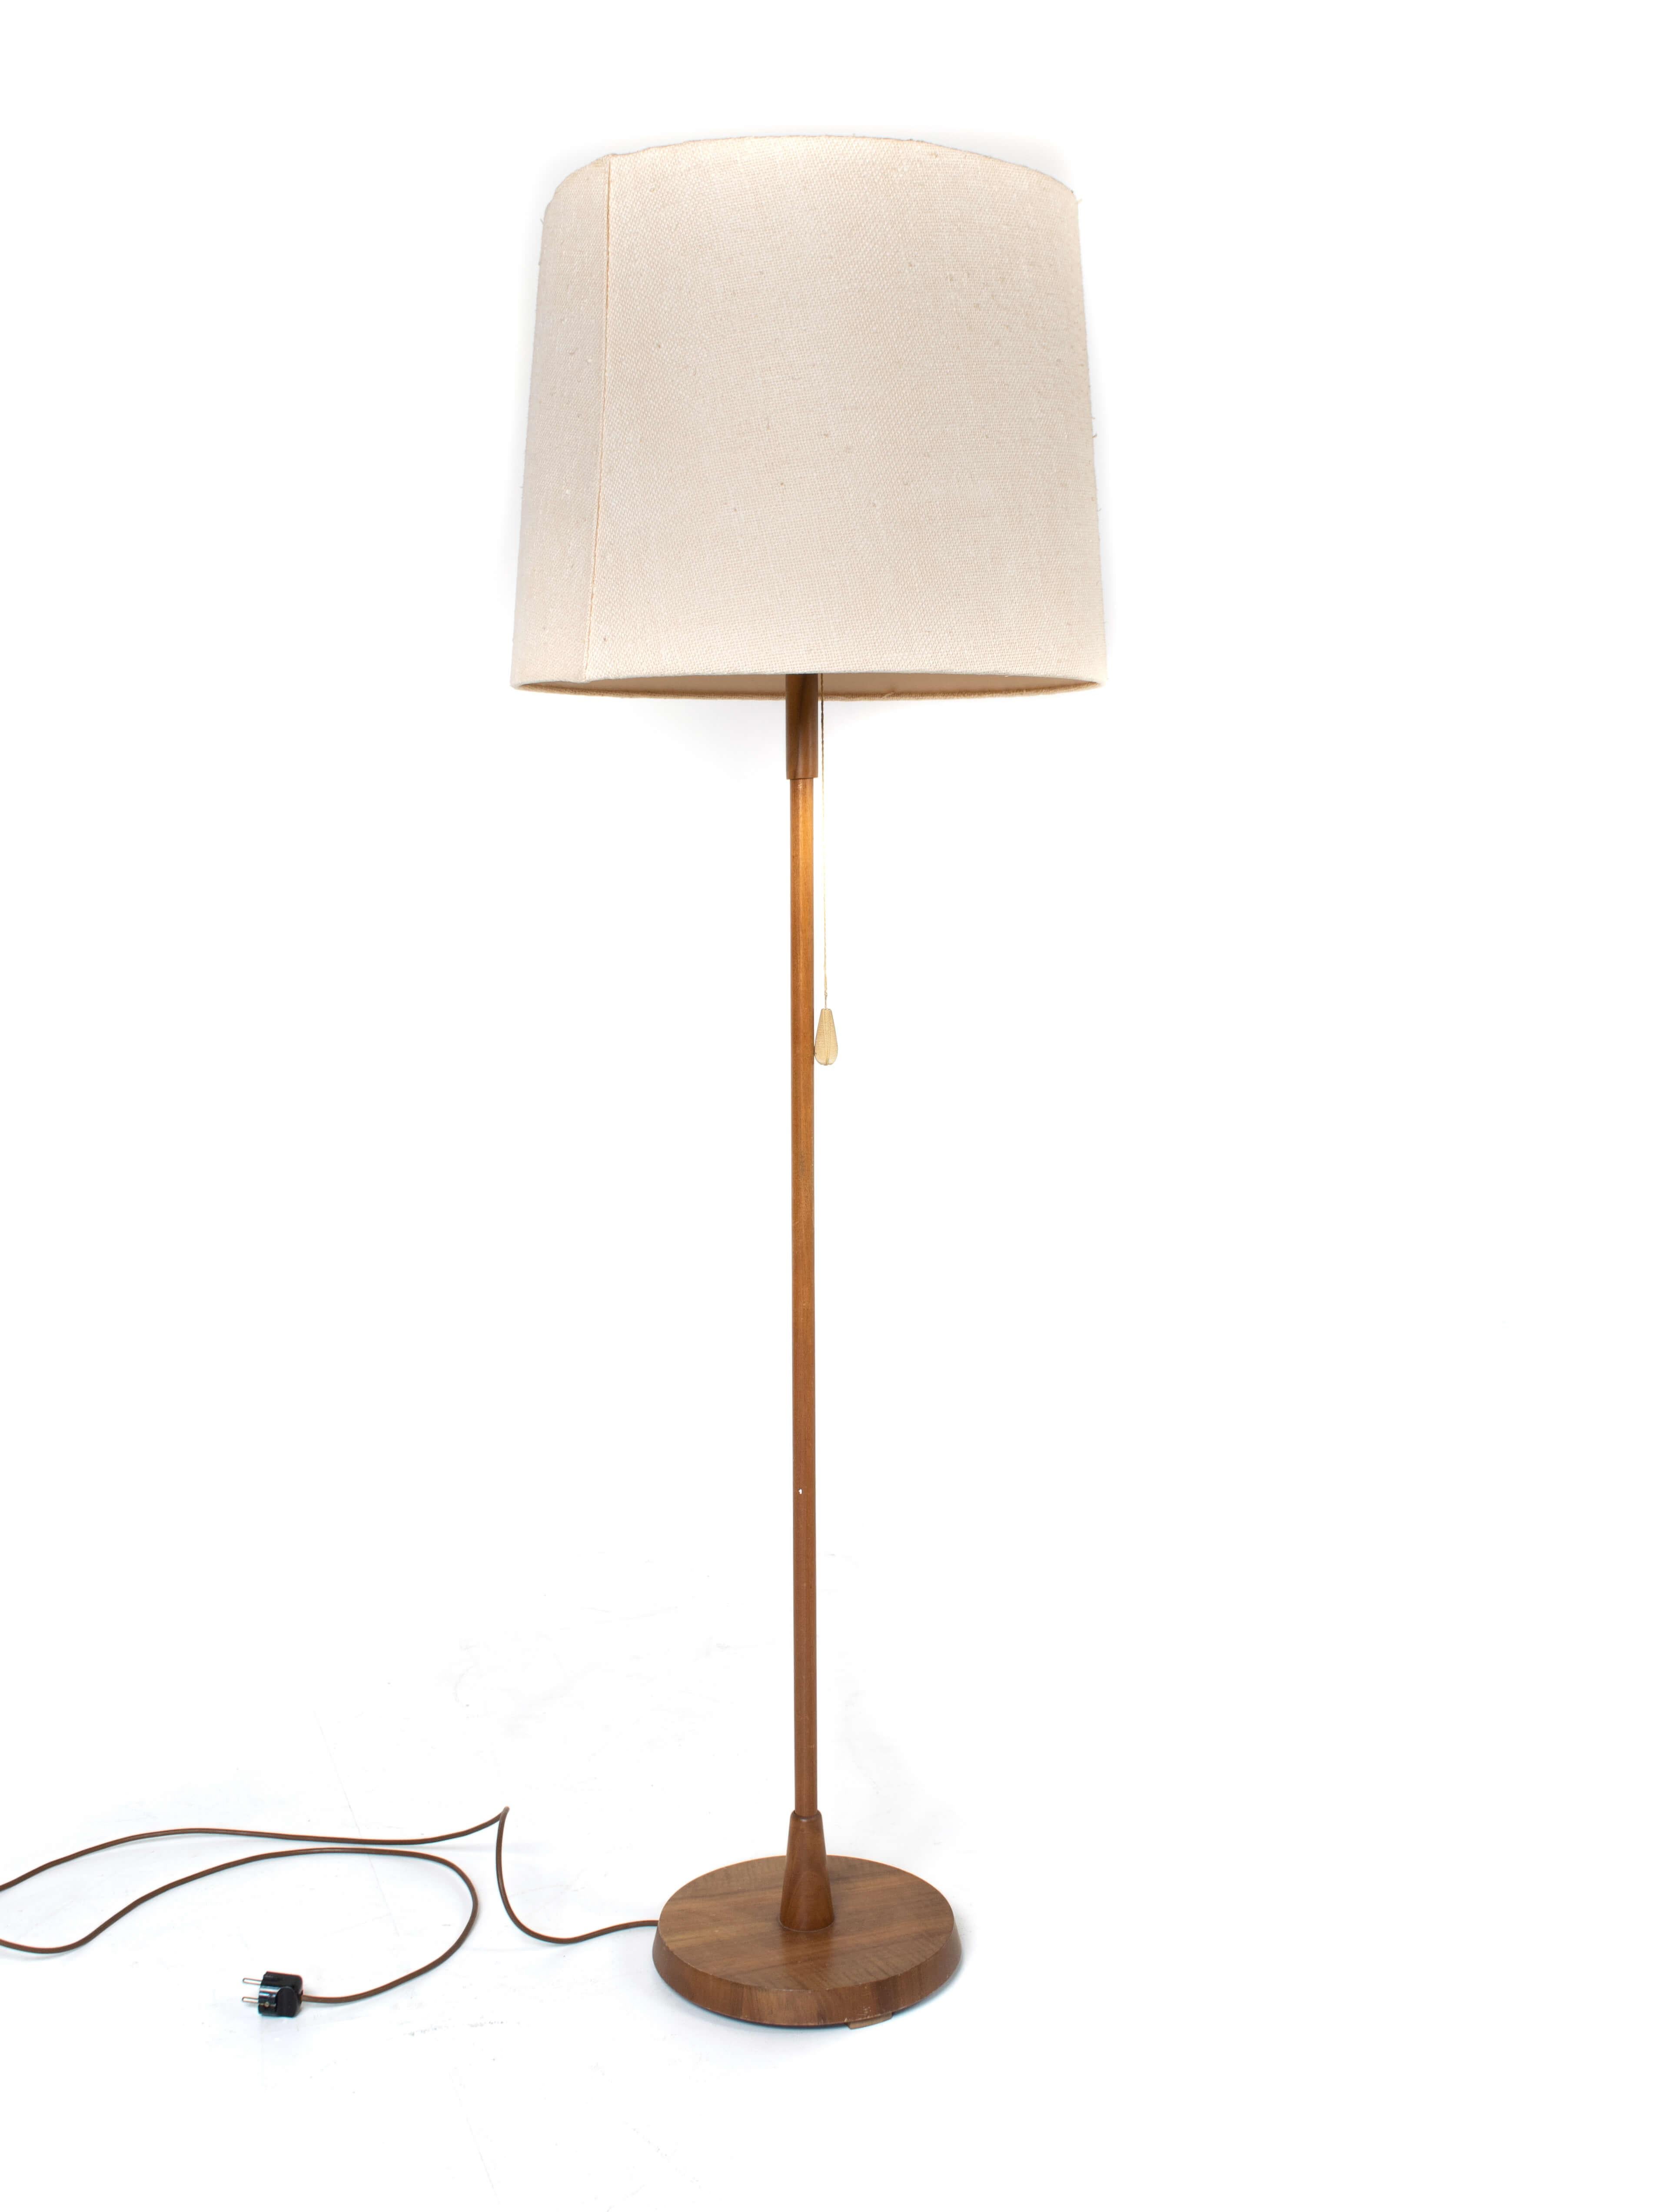 Temde floor lamp in teak and fabric from Germany, 1970s. This lamp has a teak base and a fabric hood with rice paper on top. The lamp can be adjusted in two heights with a metal mechanism. On top the rice paper sheet has some wear and tear due to